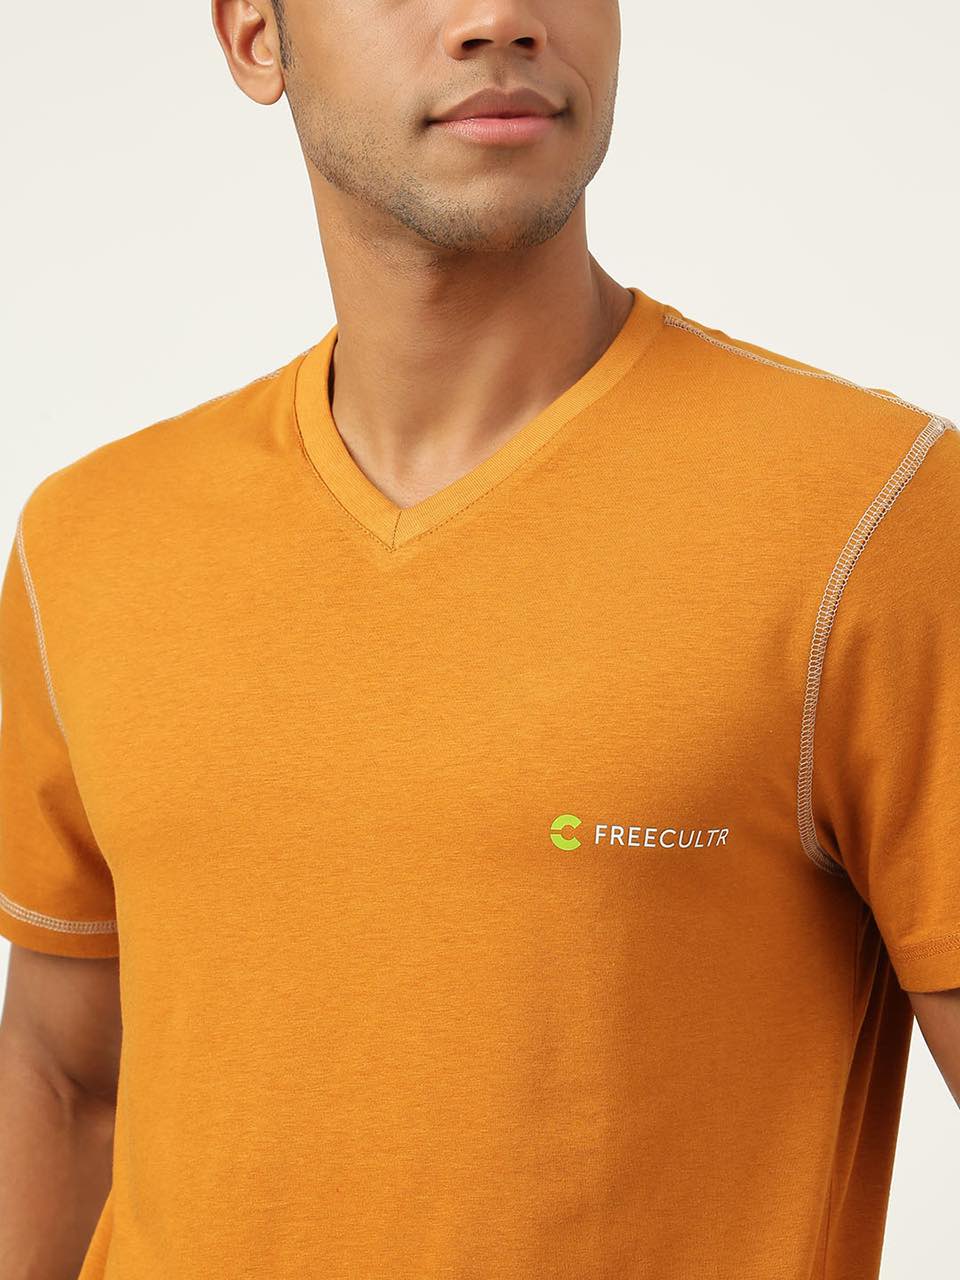 Men's Organic Bamboo Casual Tees - V Neck - (Pack of 2)